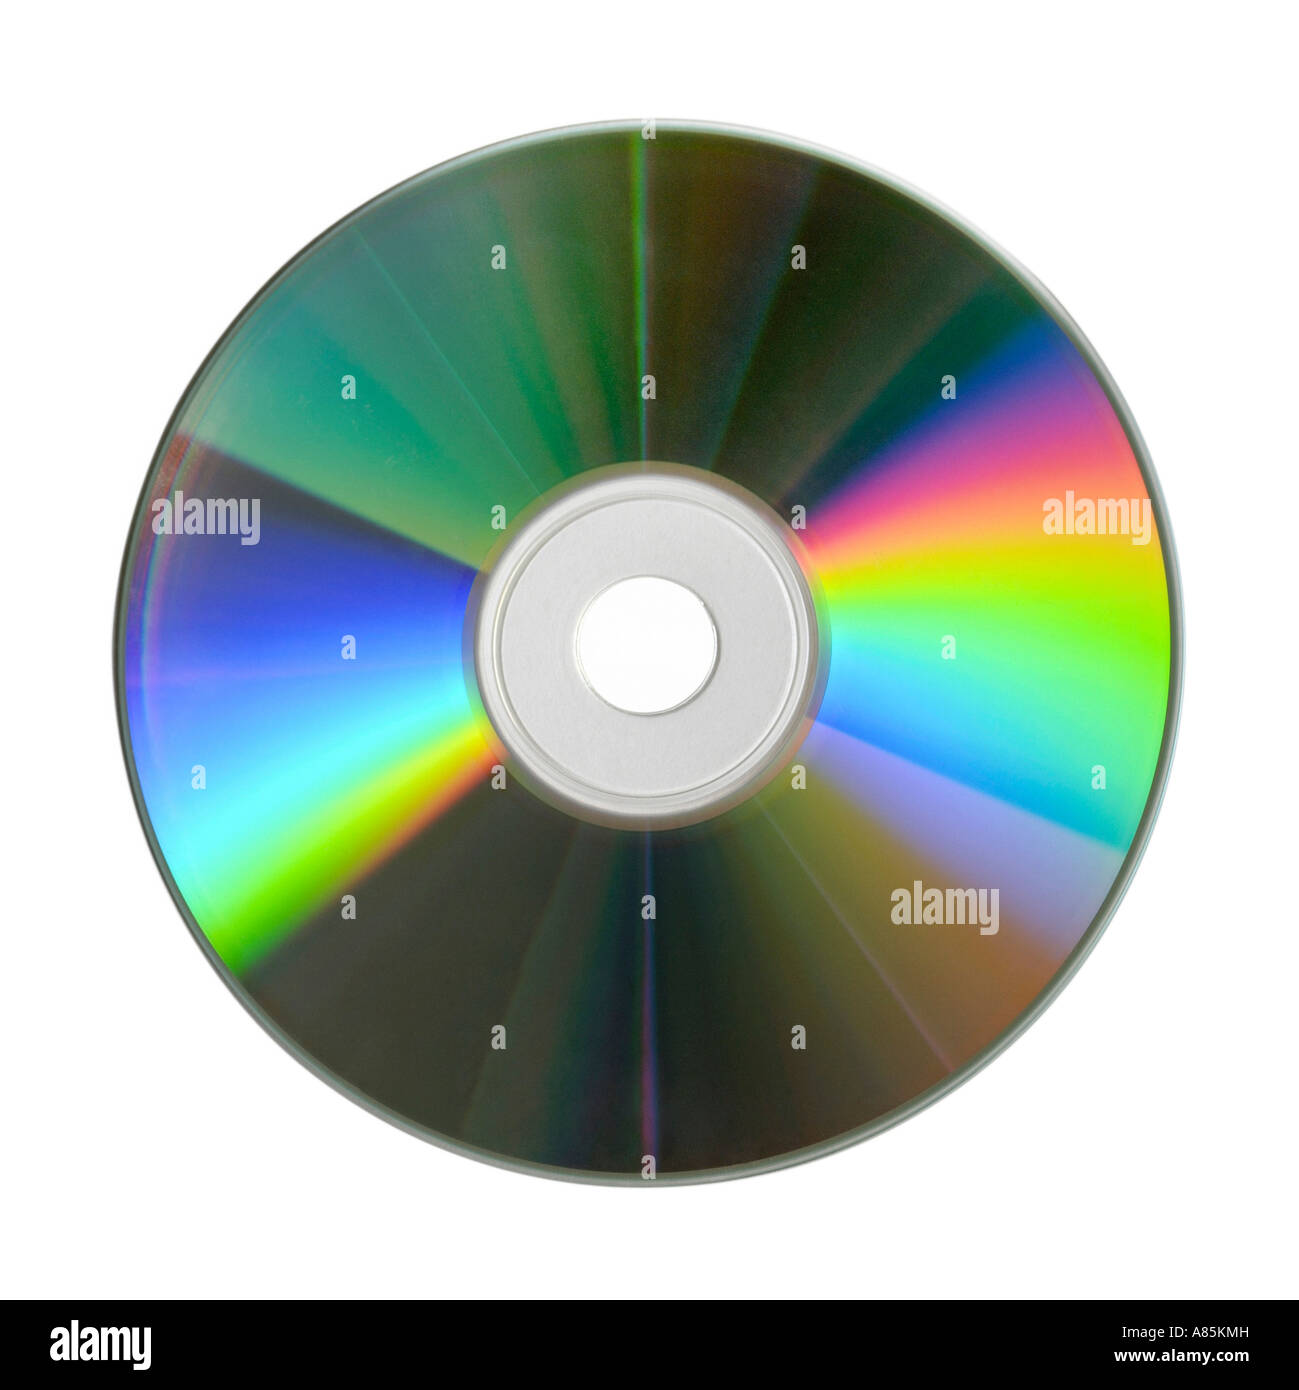 DVD CD COMPACT DISK STORAGE DISC ON WHITE BACKGROUND Stock Photo - Alamy